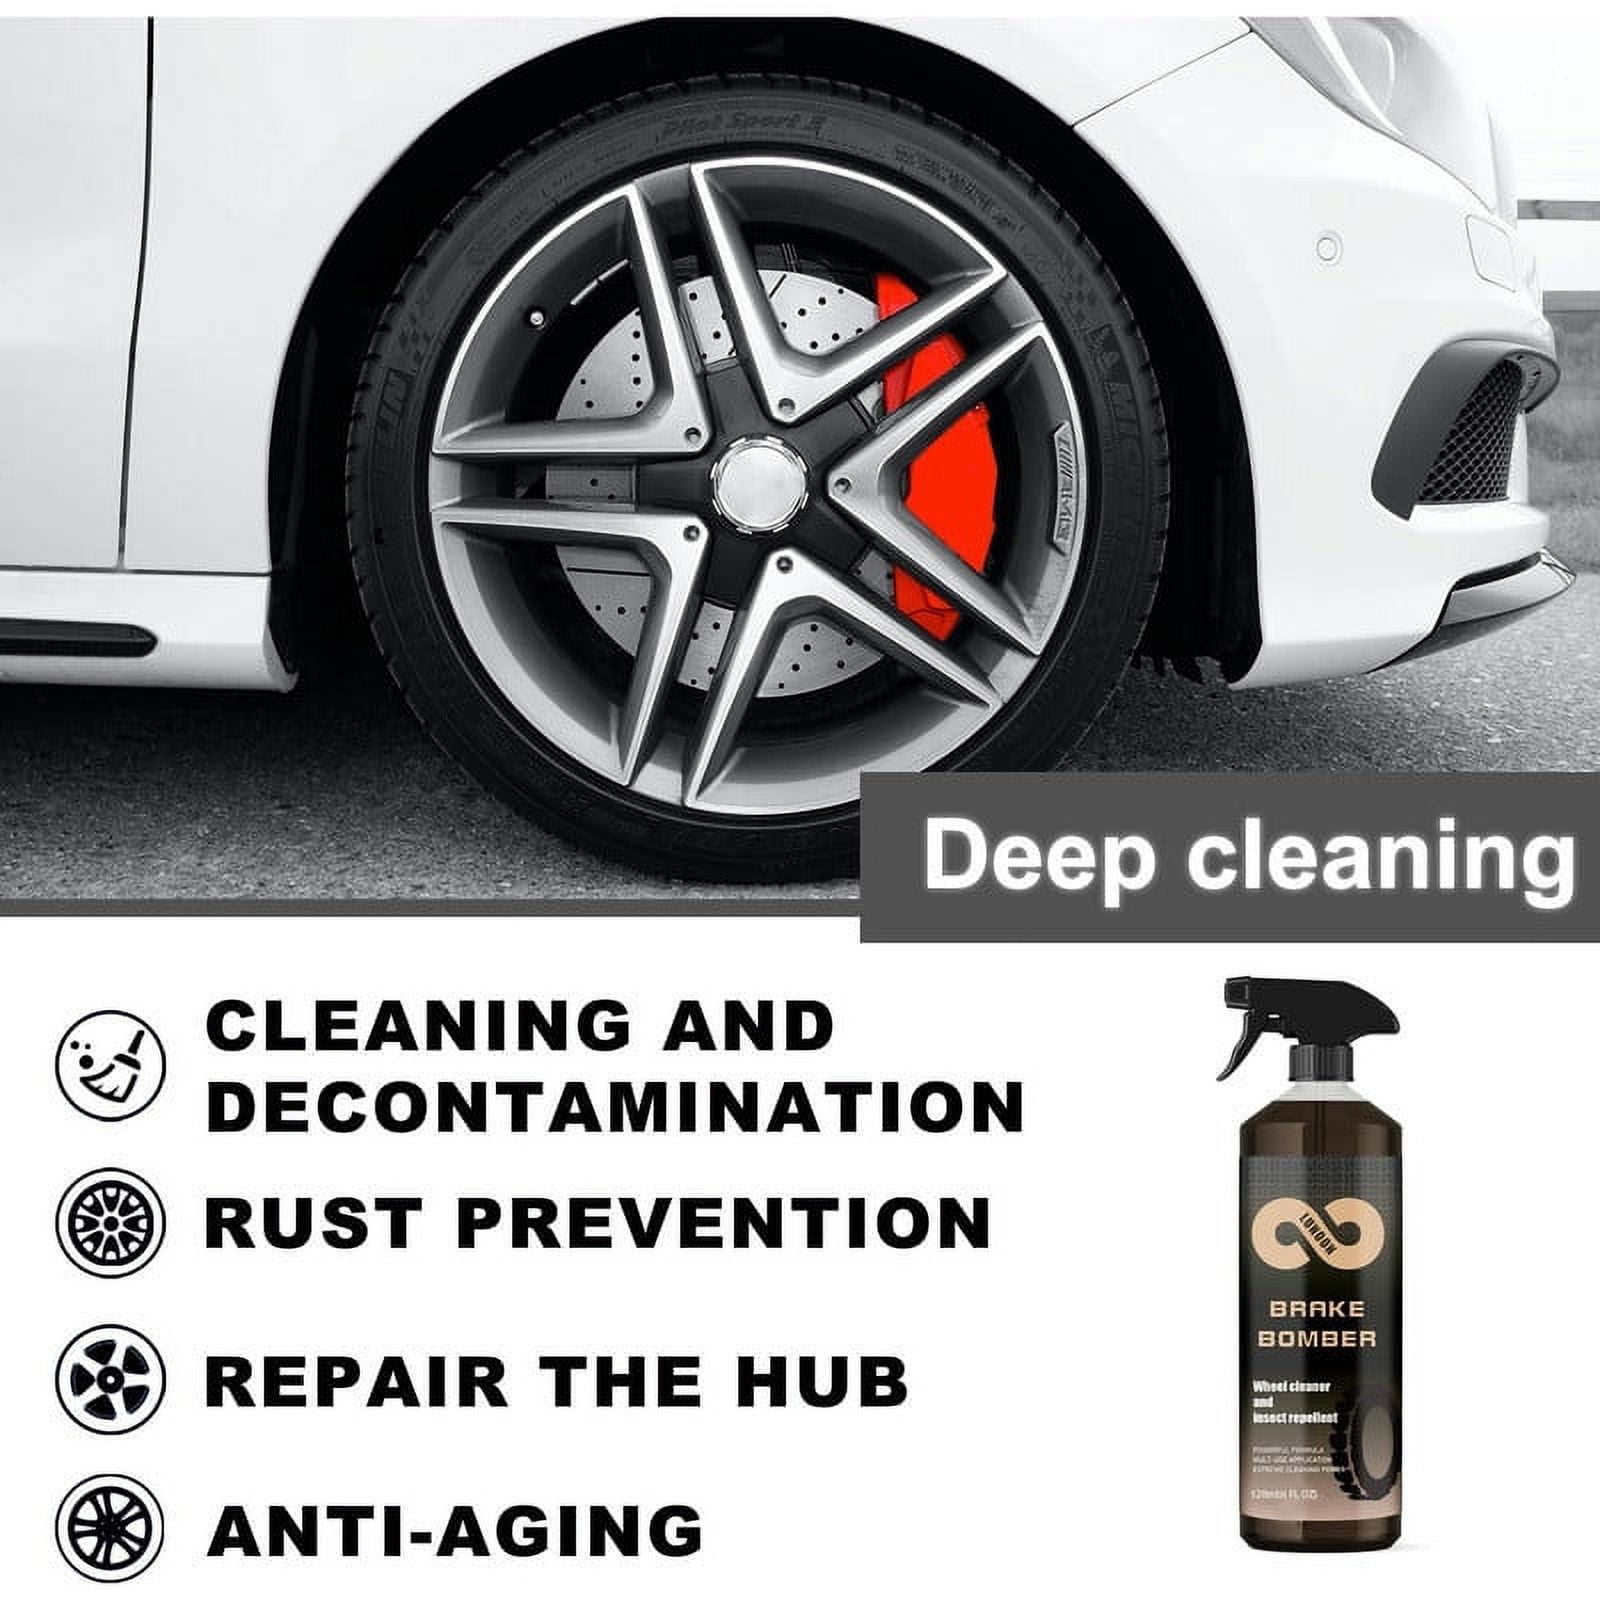 Stealth Brake Bomber 100ml Powerful Brake Cleaner Spray Can With Sponge And  Wipe Effective Brake Dust Remover Quite Brake Clean